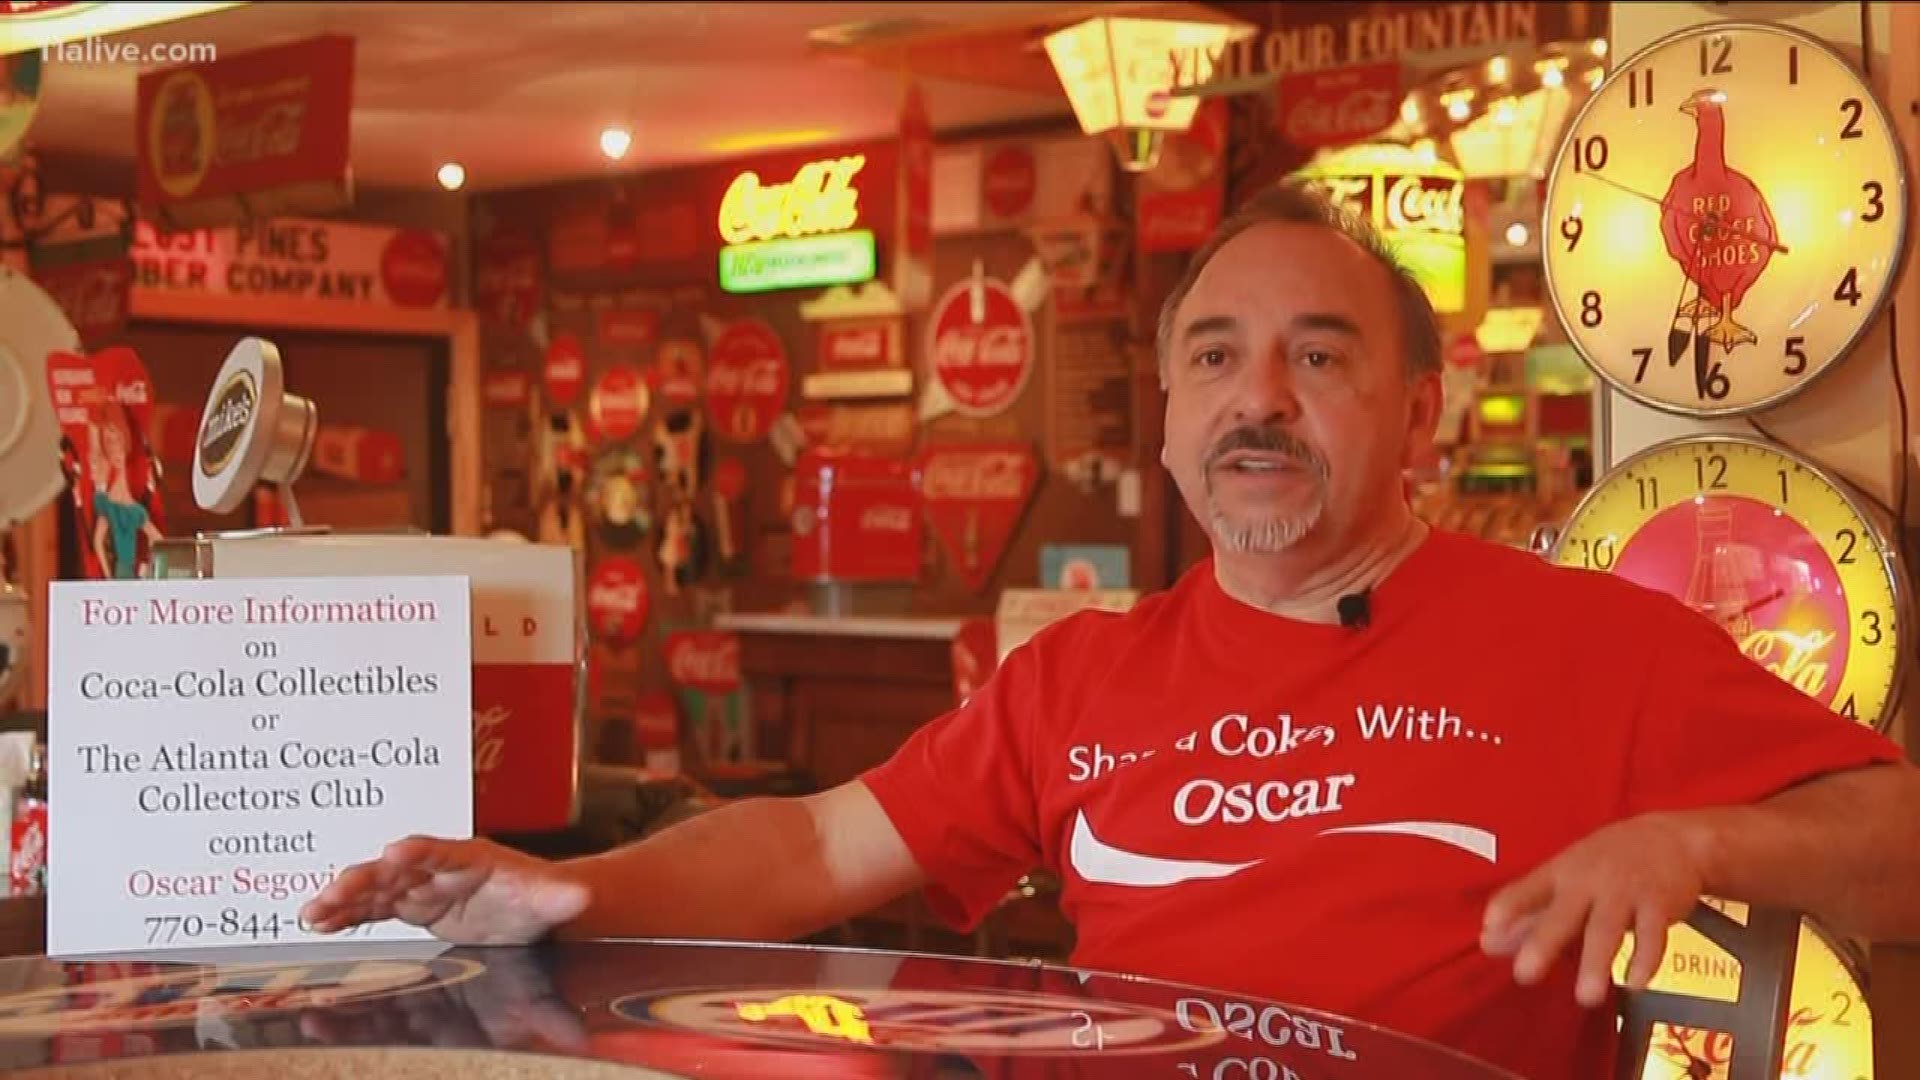 Oscar's collection is like no other! He has dedicated his life to collecting all things Coca-Cola.